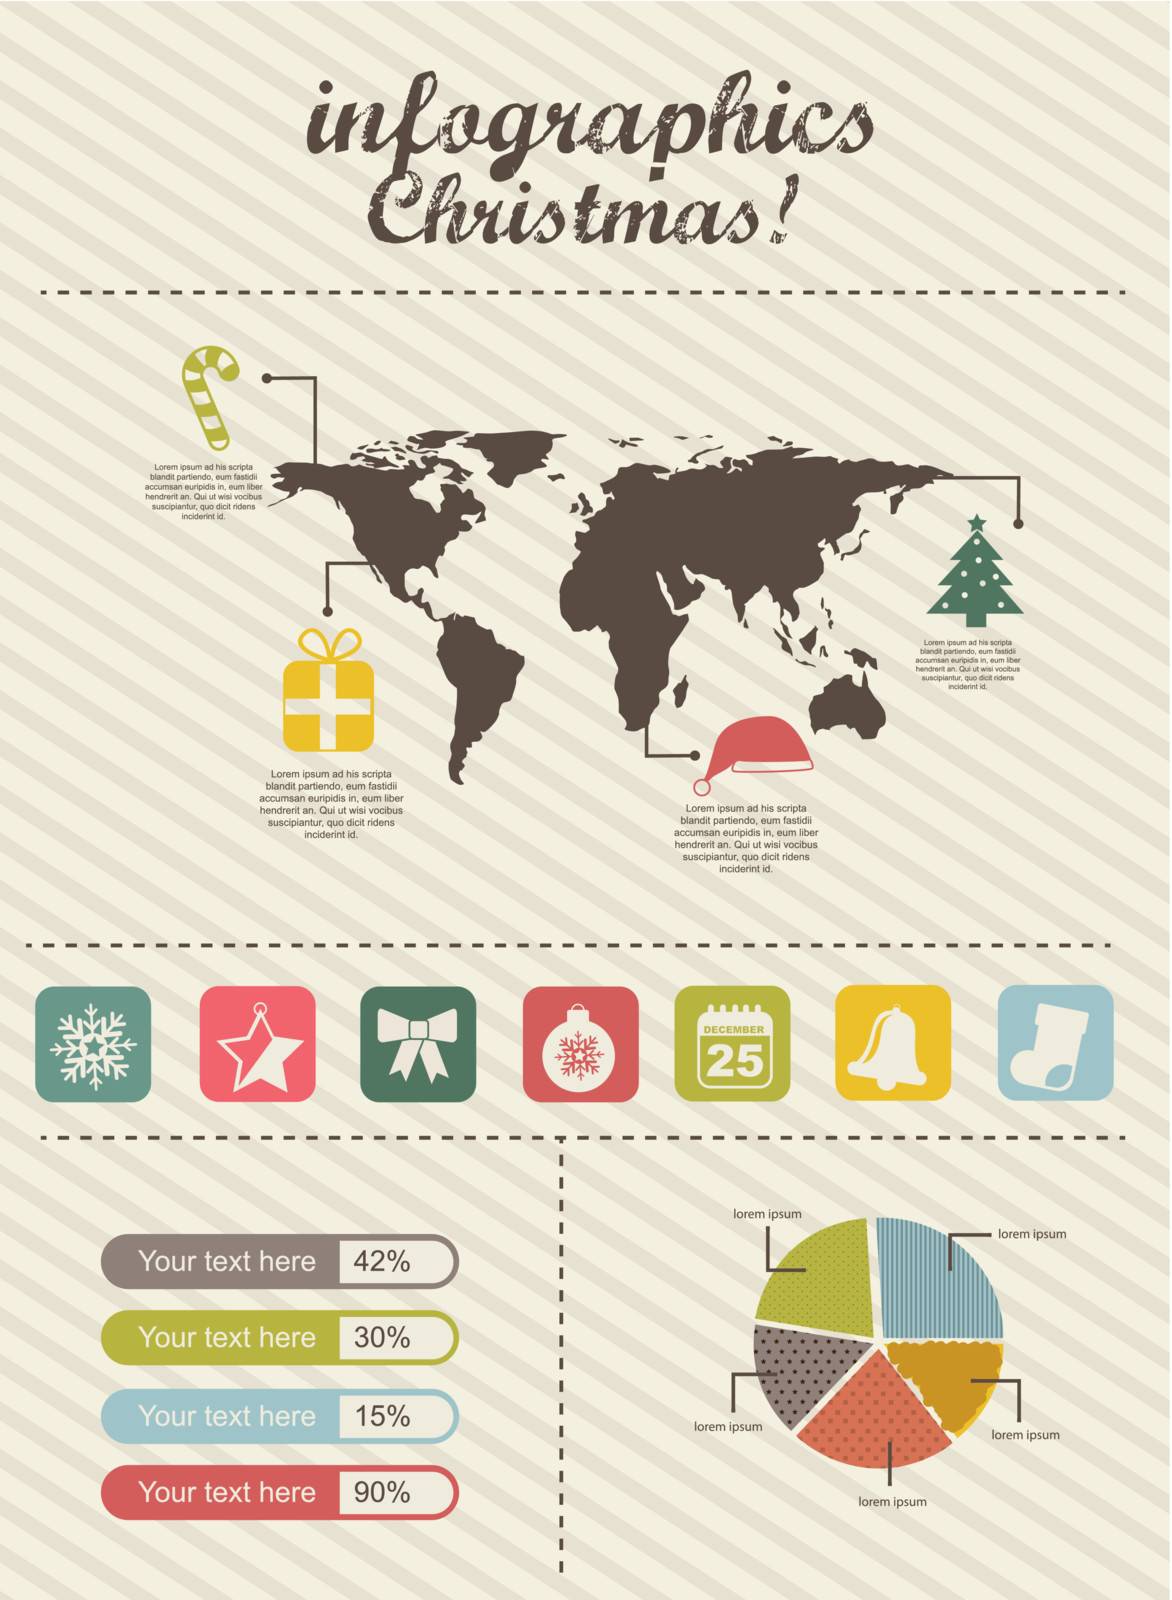 infographics christmas, vintage style. vector illustration